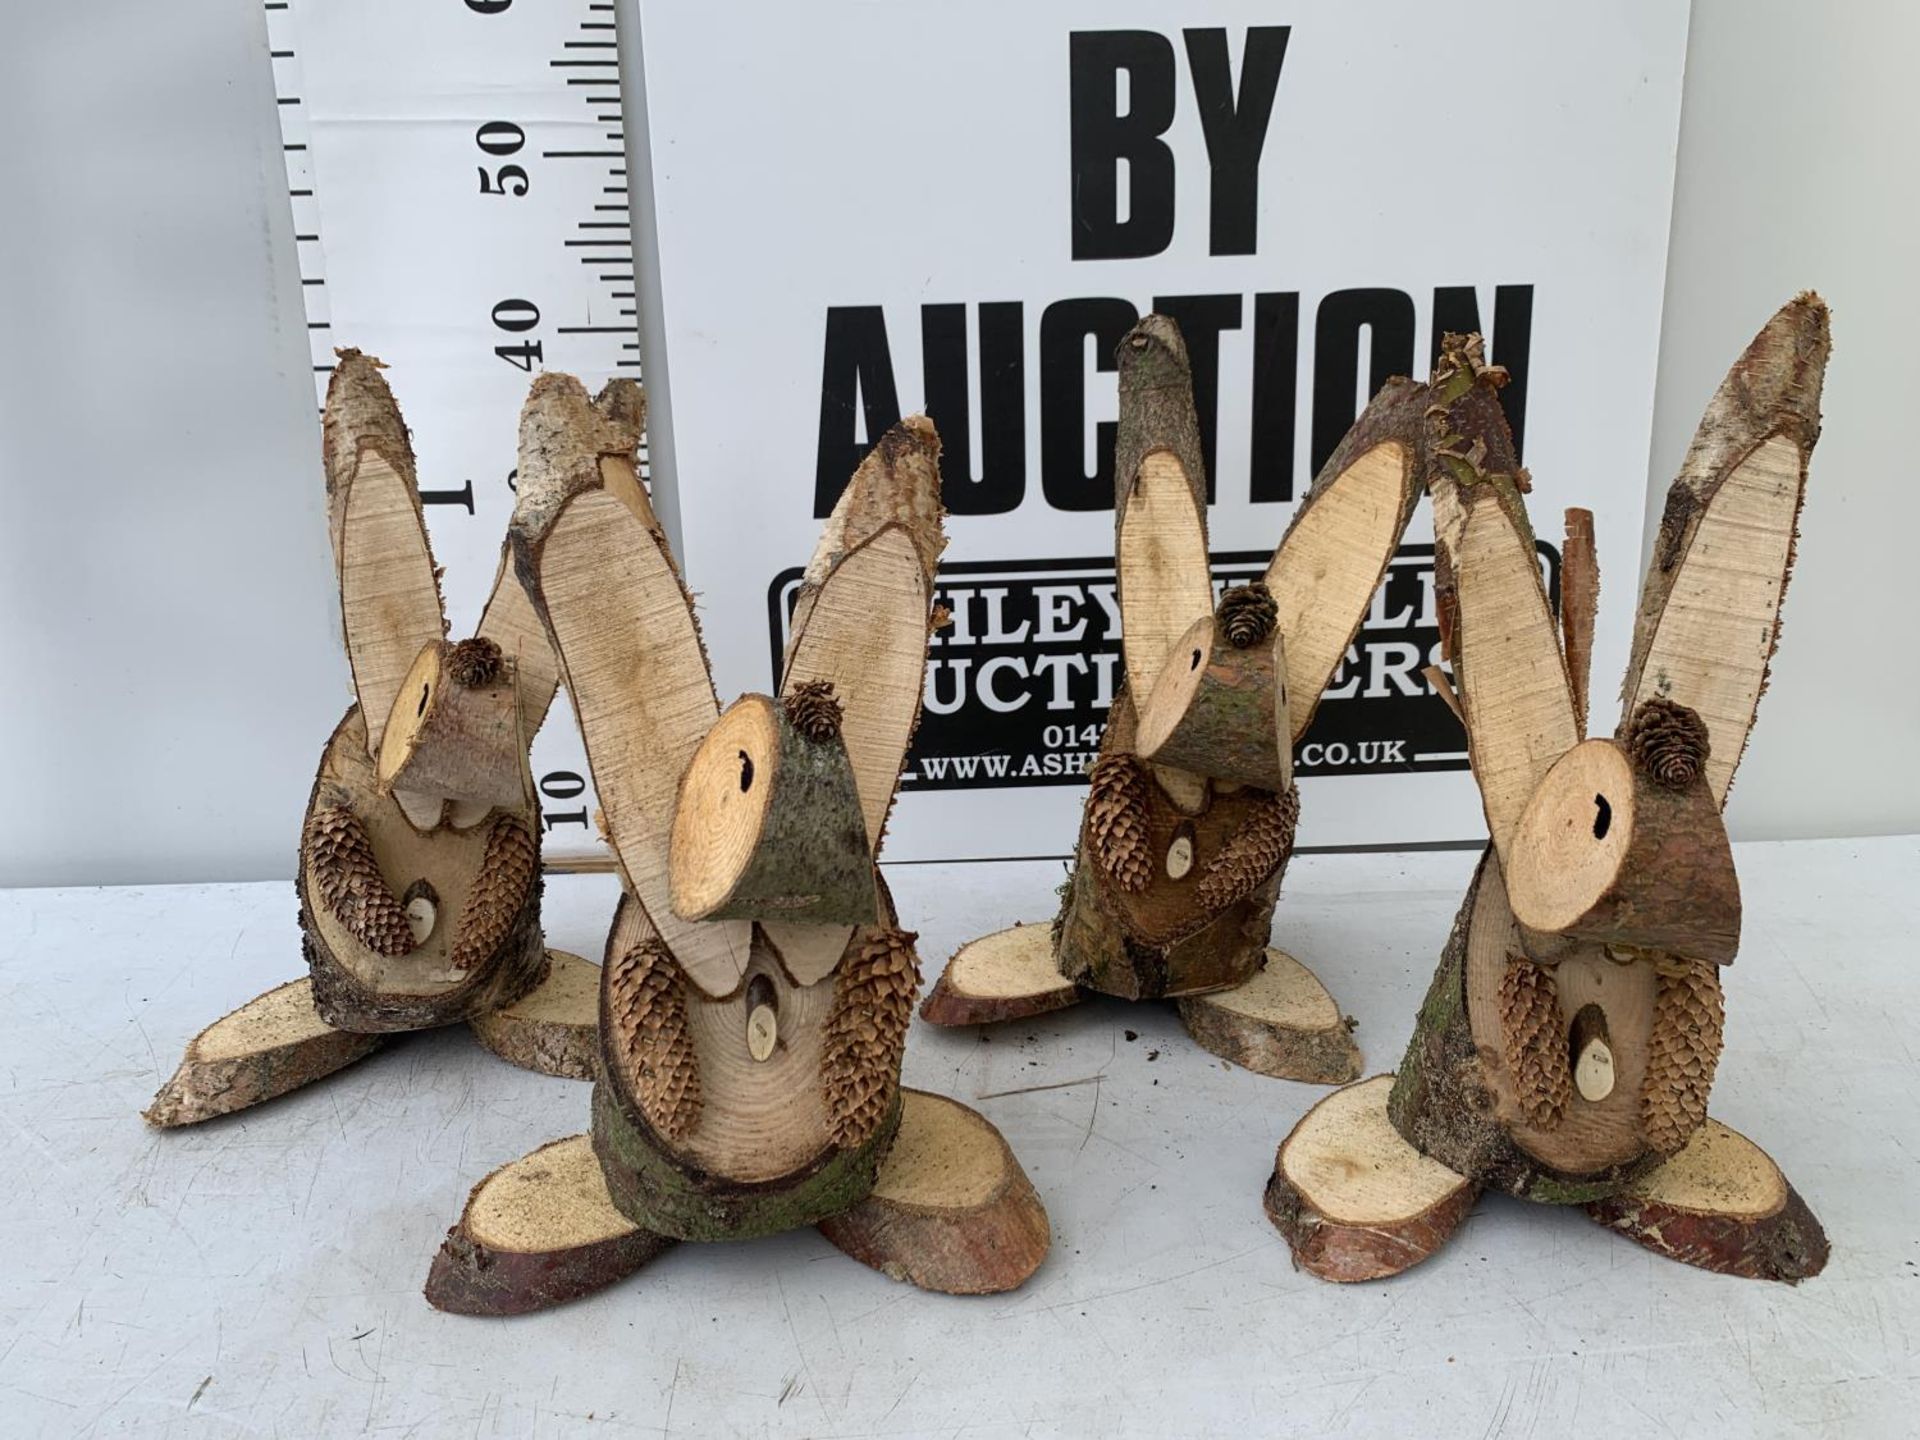 FOUR RABBIT FIGURES MADE FROM LOGS NO VAT TO BE SOLD FOR THE FOUR